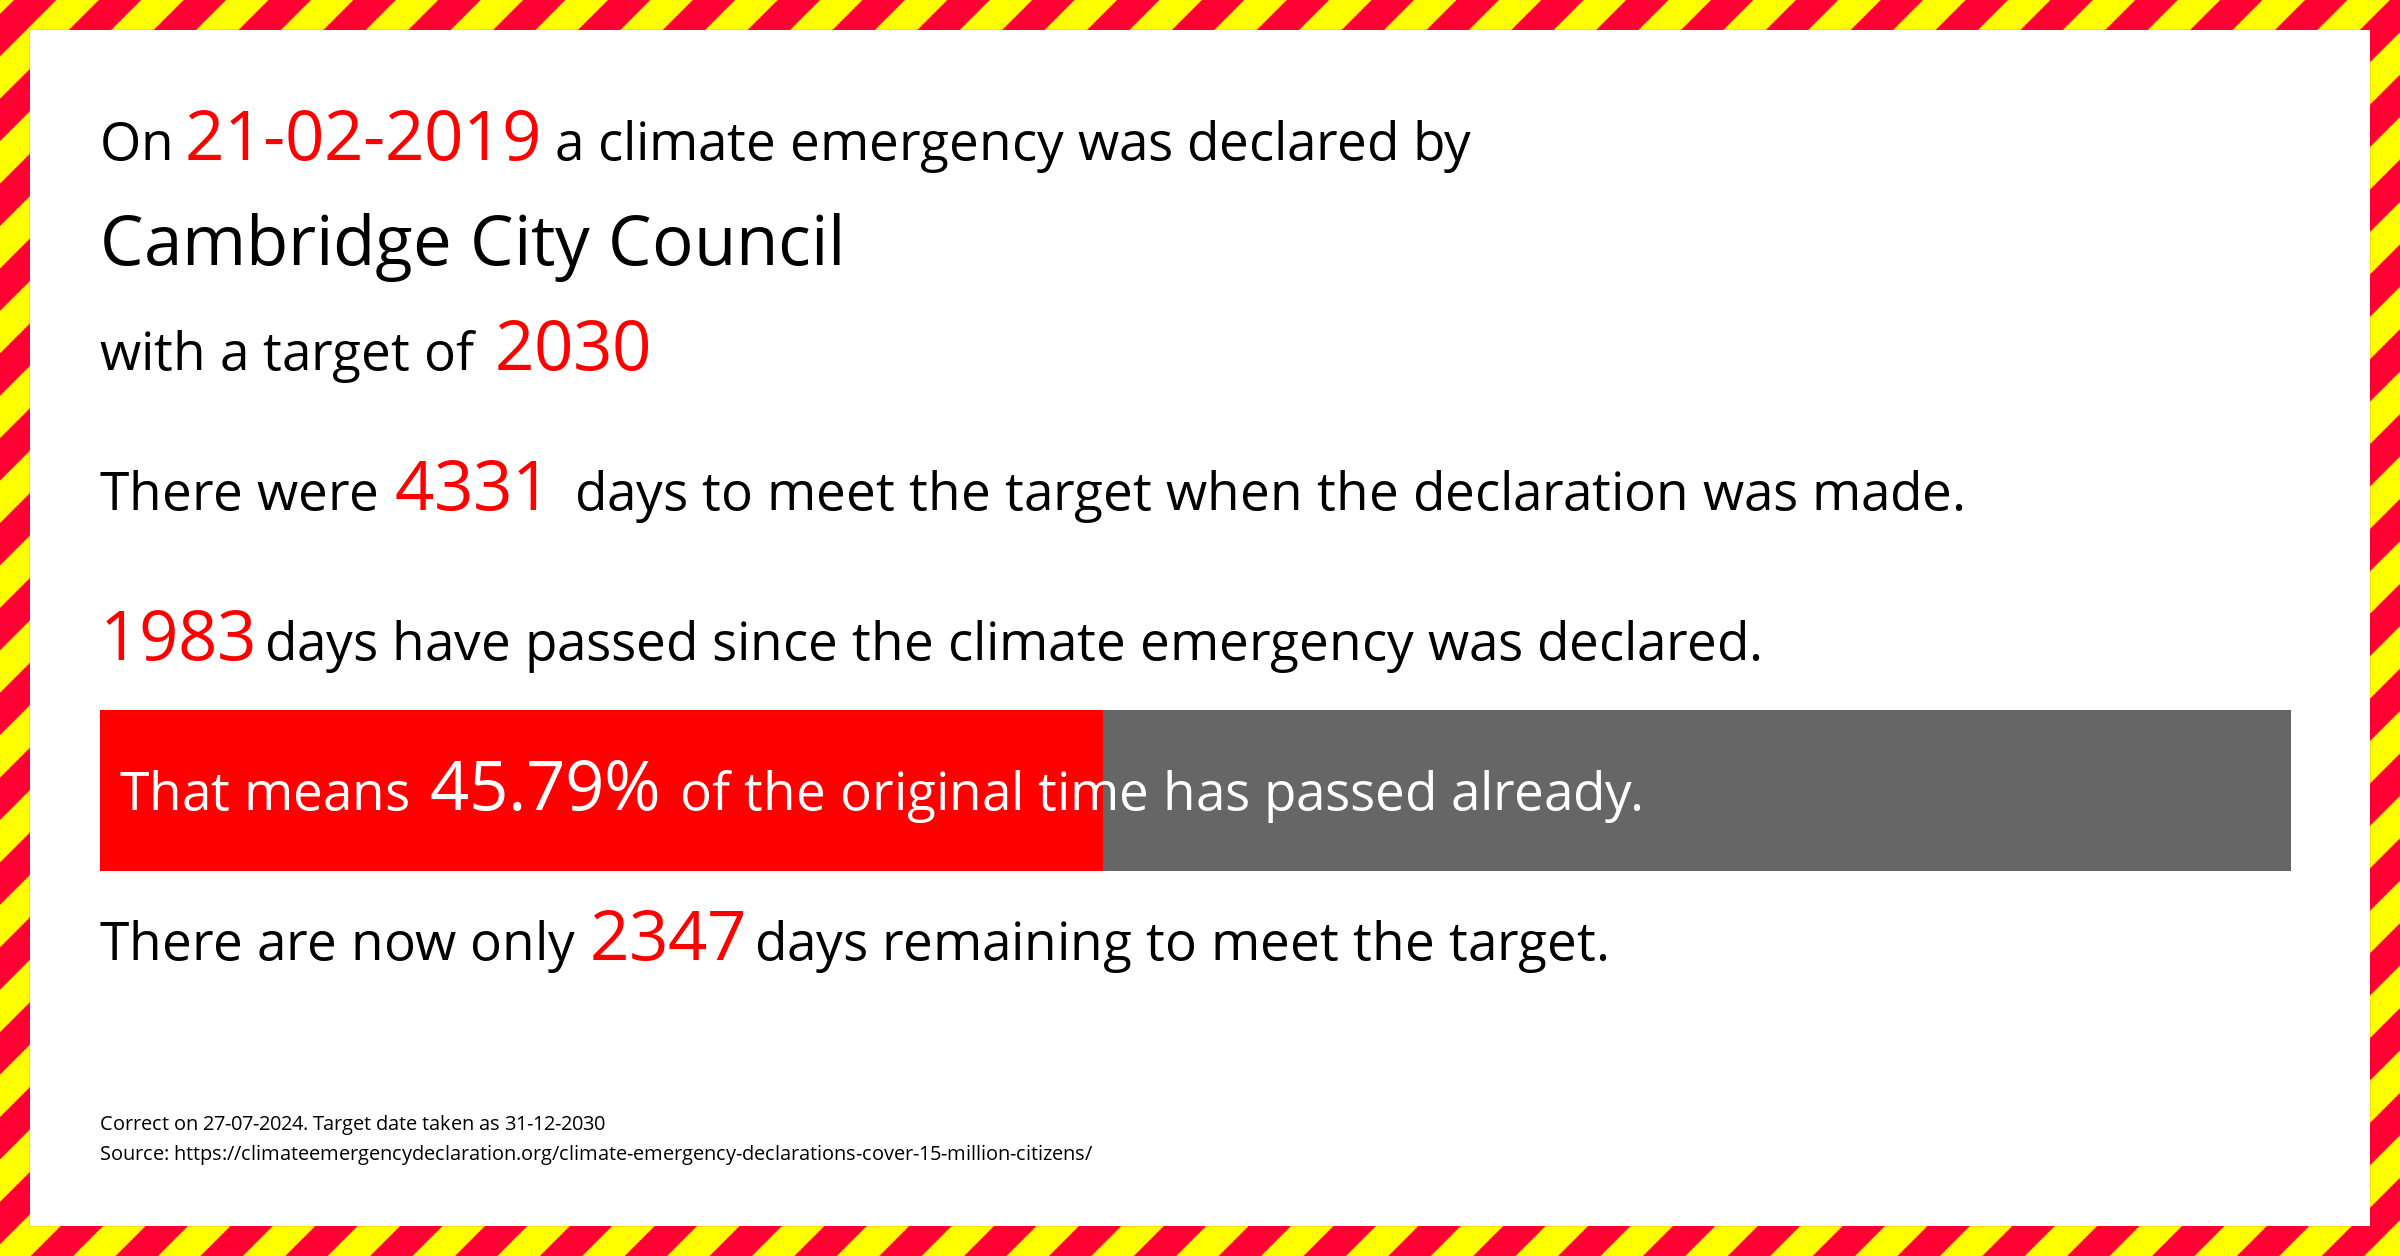 Cambridge City Council declared a Climate emergency on Thursday 21st February 2019, with a target of 2030.